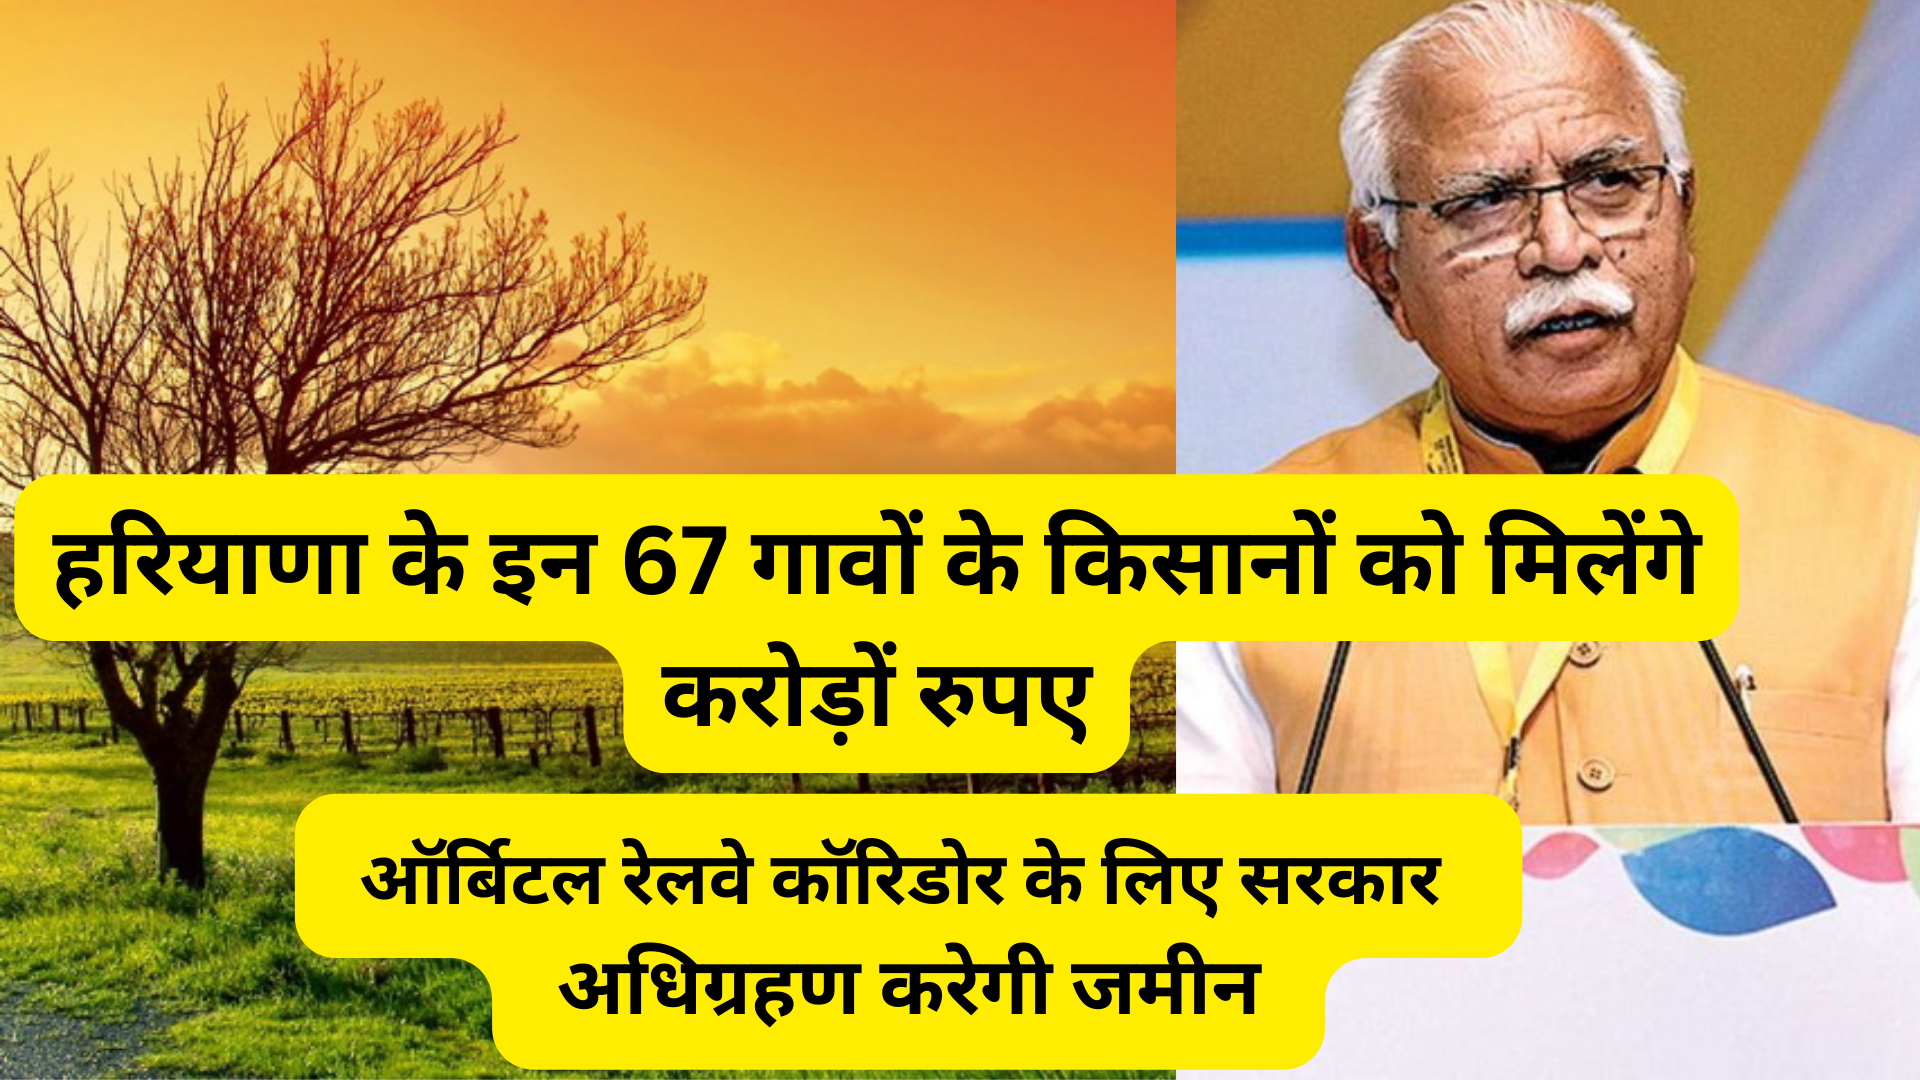 farmers of these 67 villages of haryana will get crores